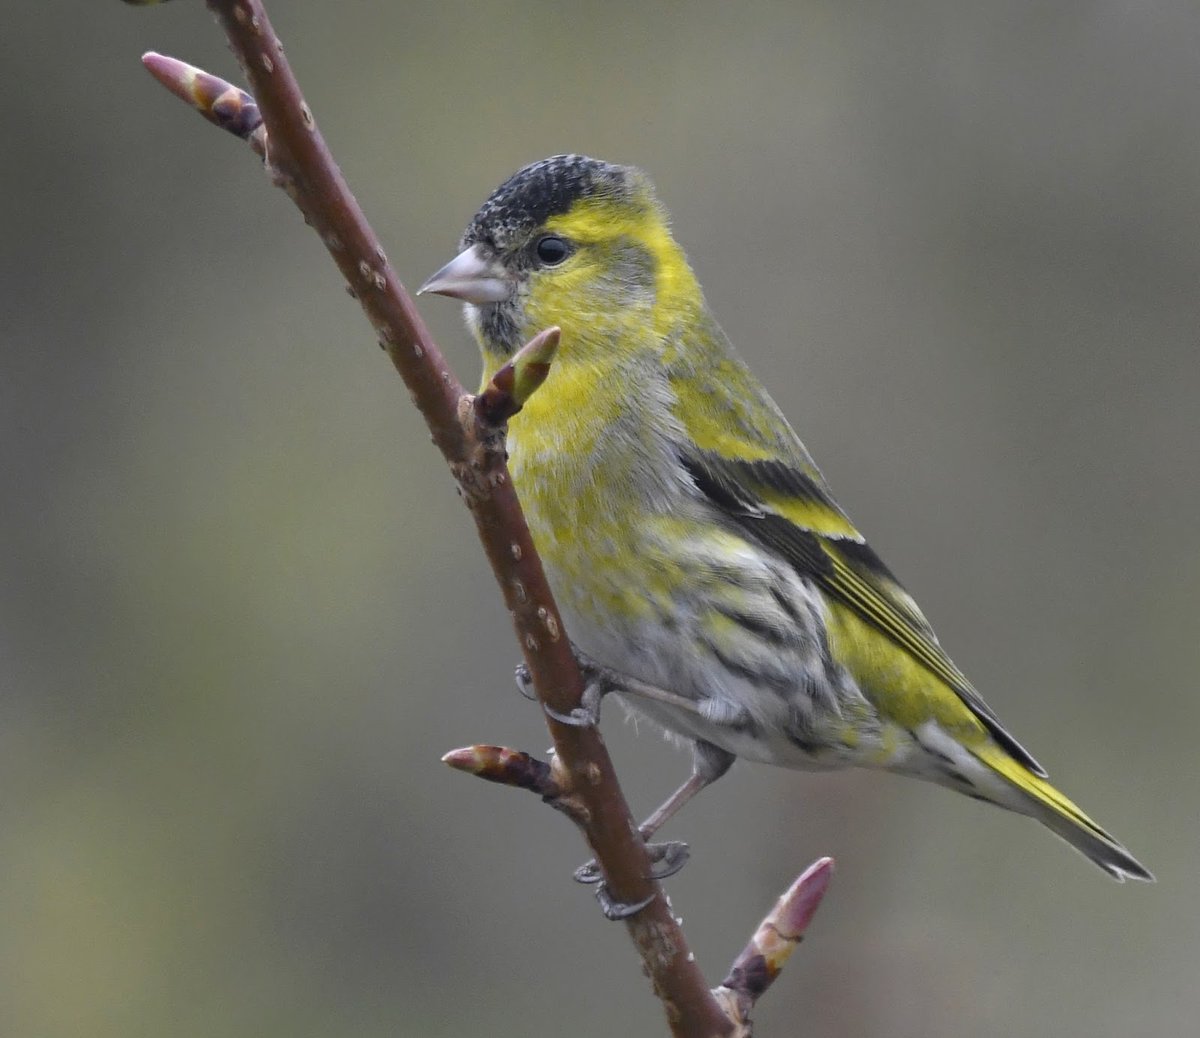 Siskin If you're lucky, you may have these lovely little finches visiting your garden. Smaller than Greenfinches, with more streaking in their plumage.Males have darker areas on their head and wings. Tail is forked.Female, as usual, is duller. #SelfIsolationBirdWatch 